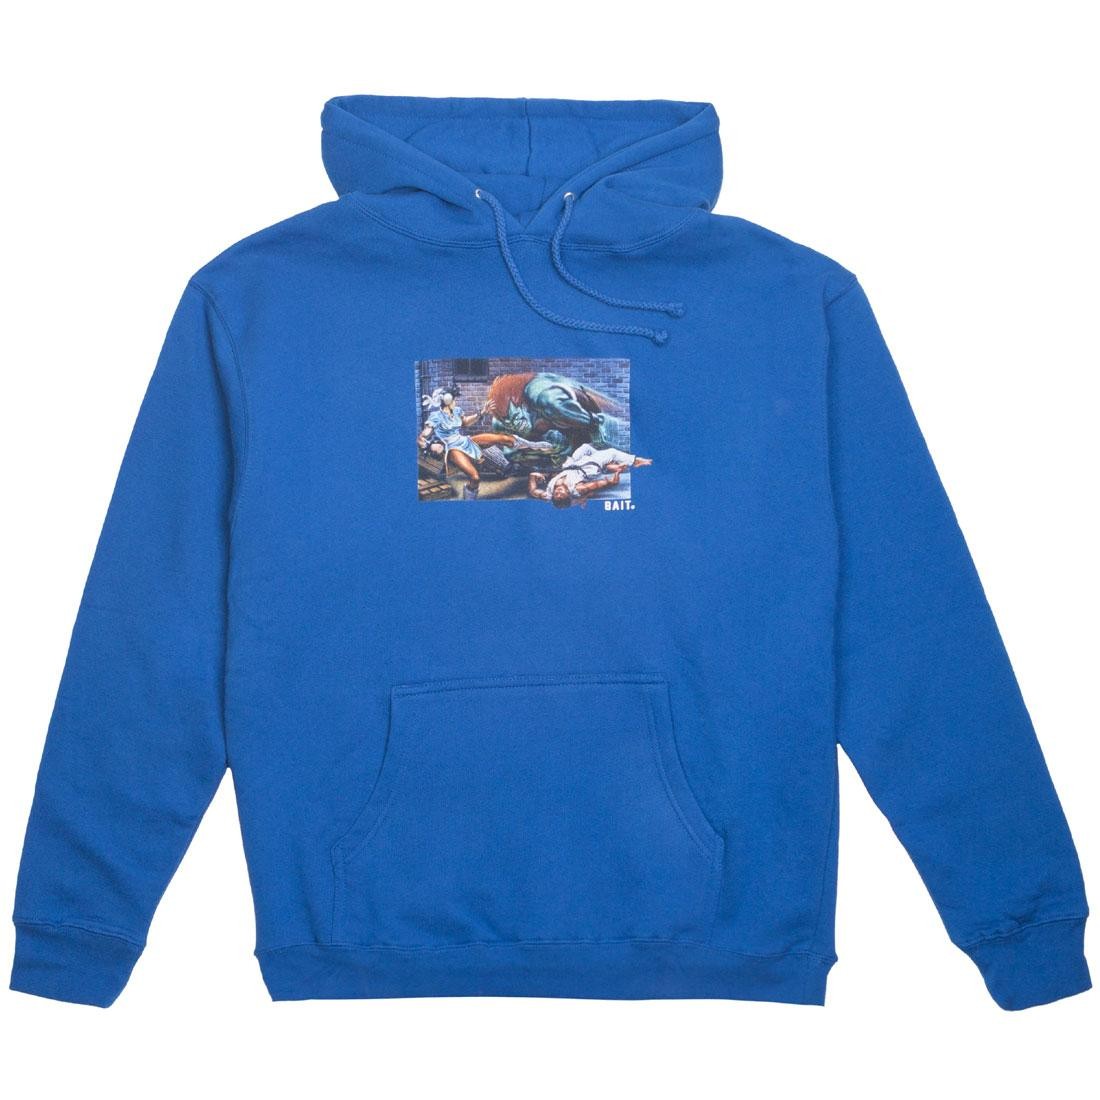 Use spaces to separate tags. Use single quotes for phrases Men The World Warrior Hoody (blue / royal)